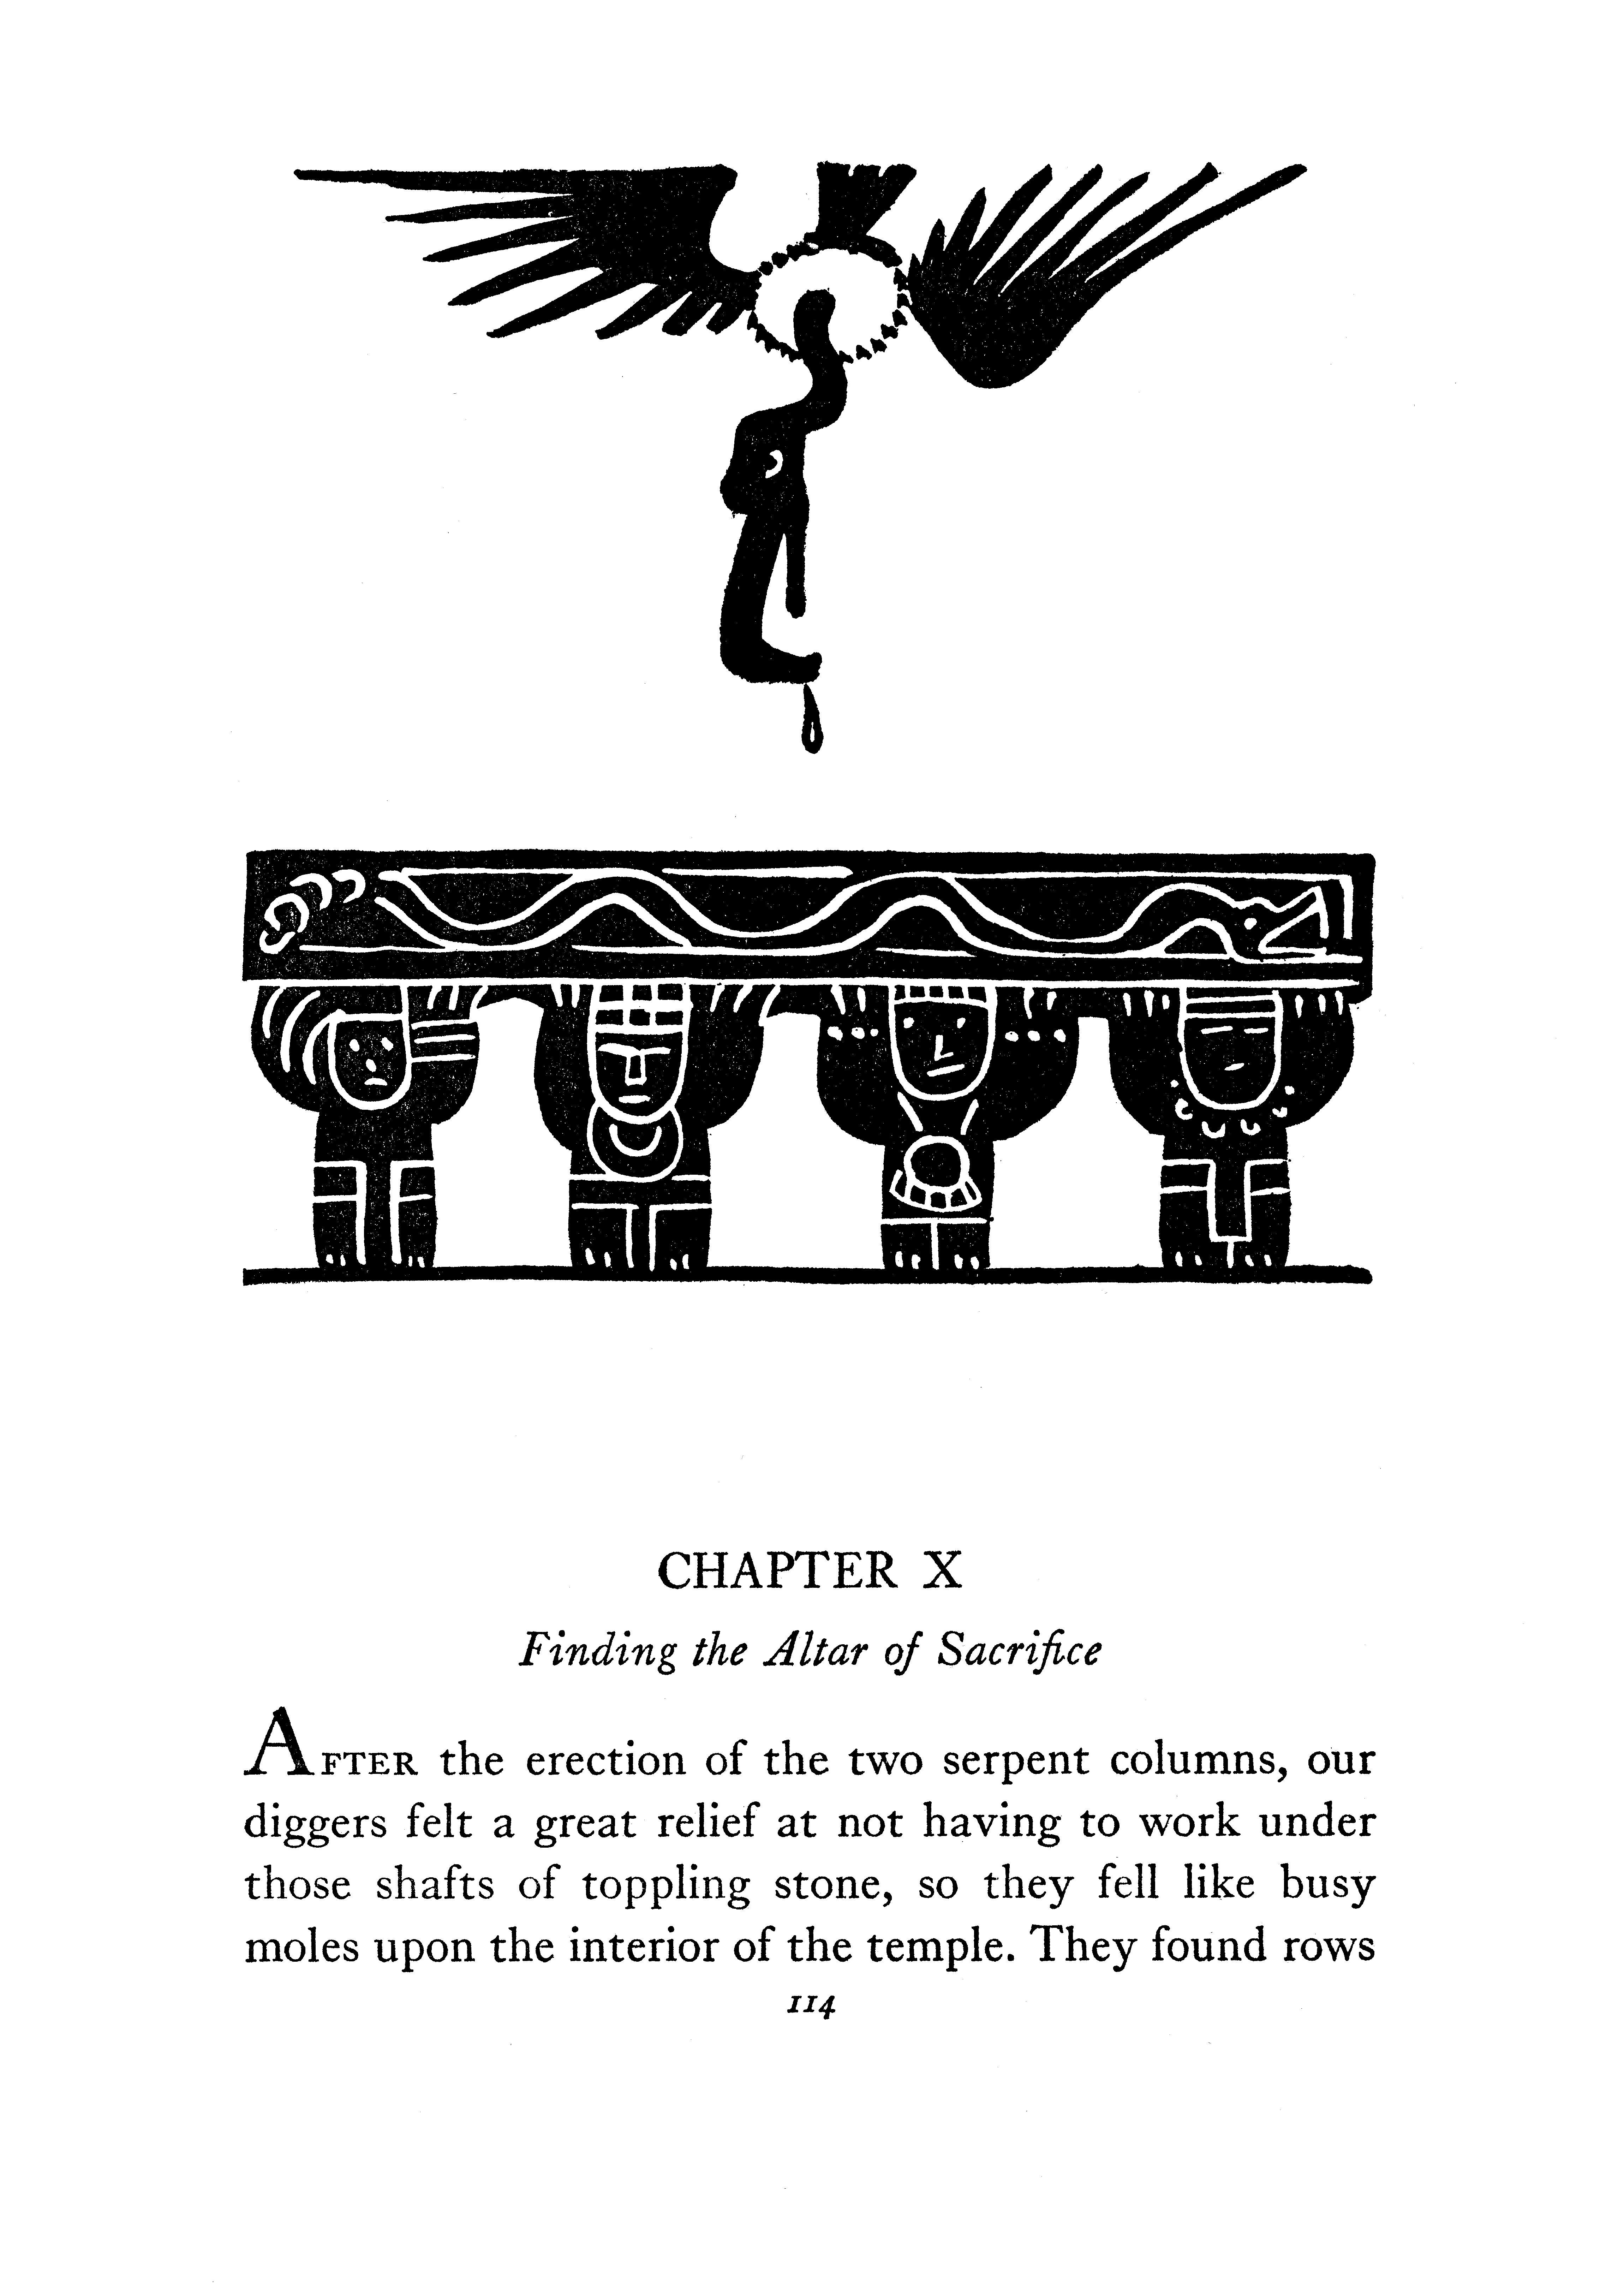 Page 114 of 'Digging in Yucatan' written by Ann Axtell Morris.  Decorations by Jean Charlot.